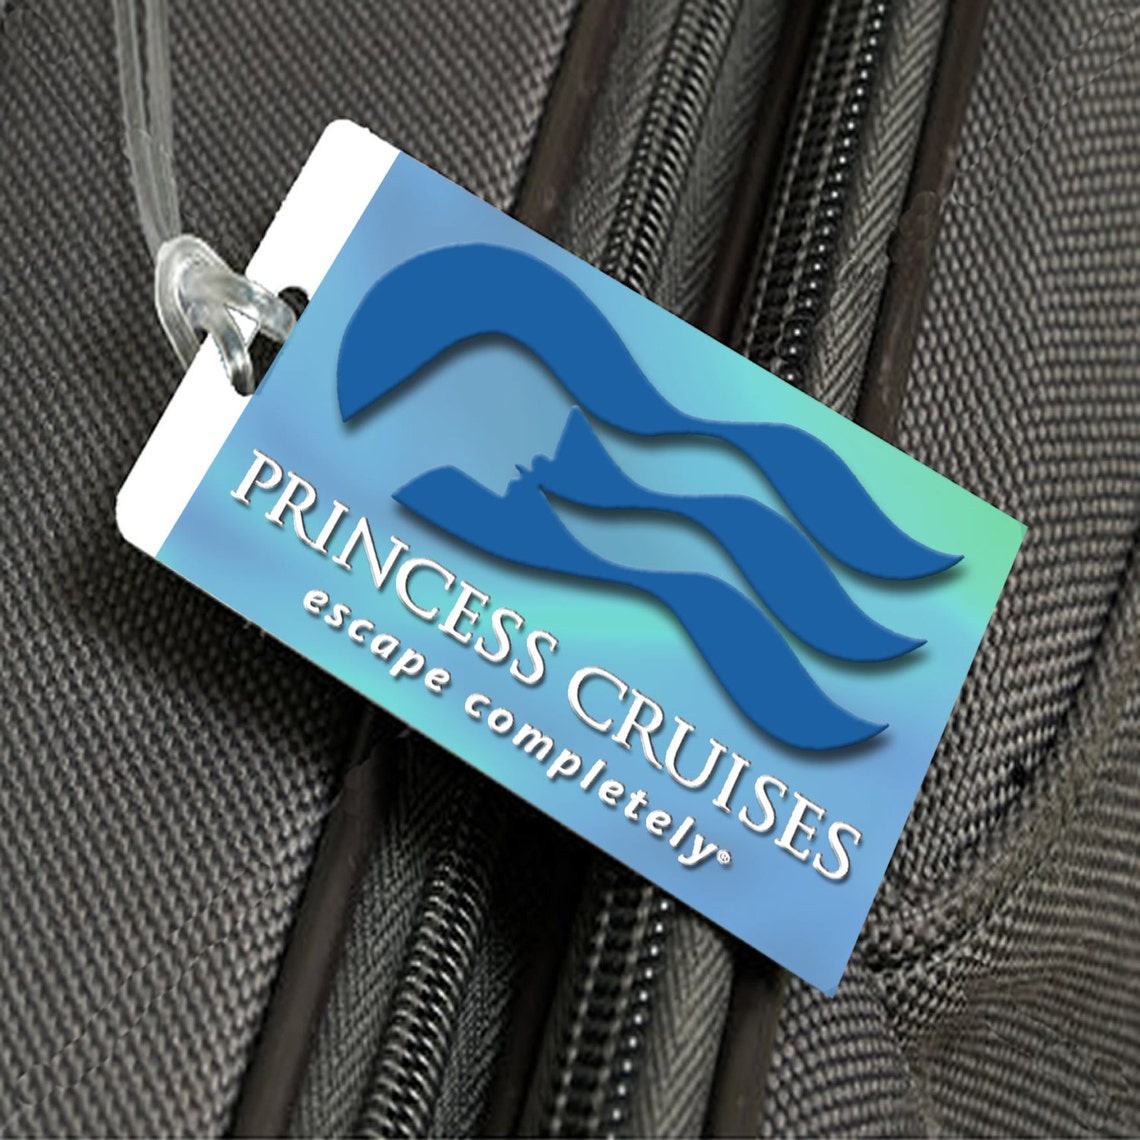 cruise luggage tags nearby